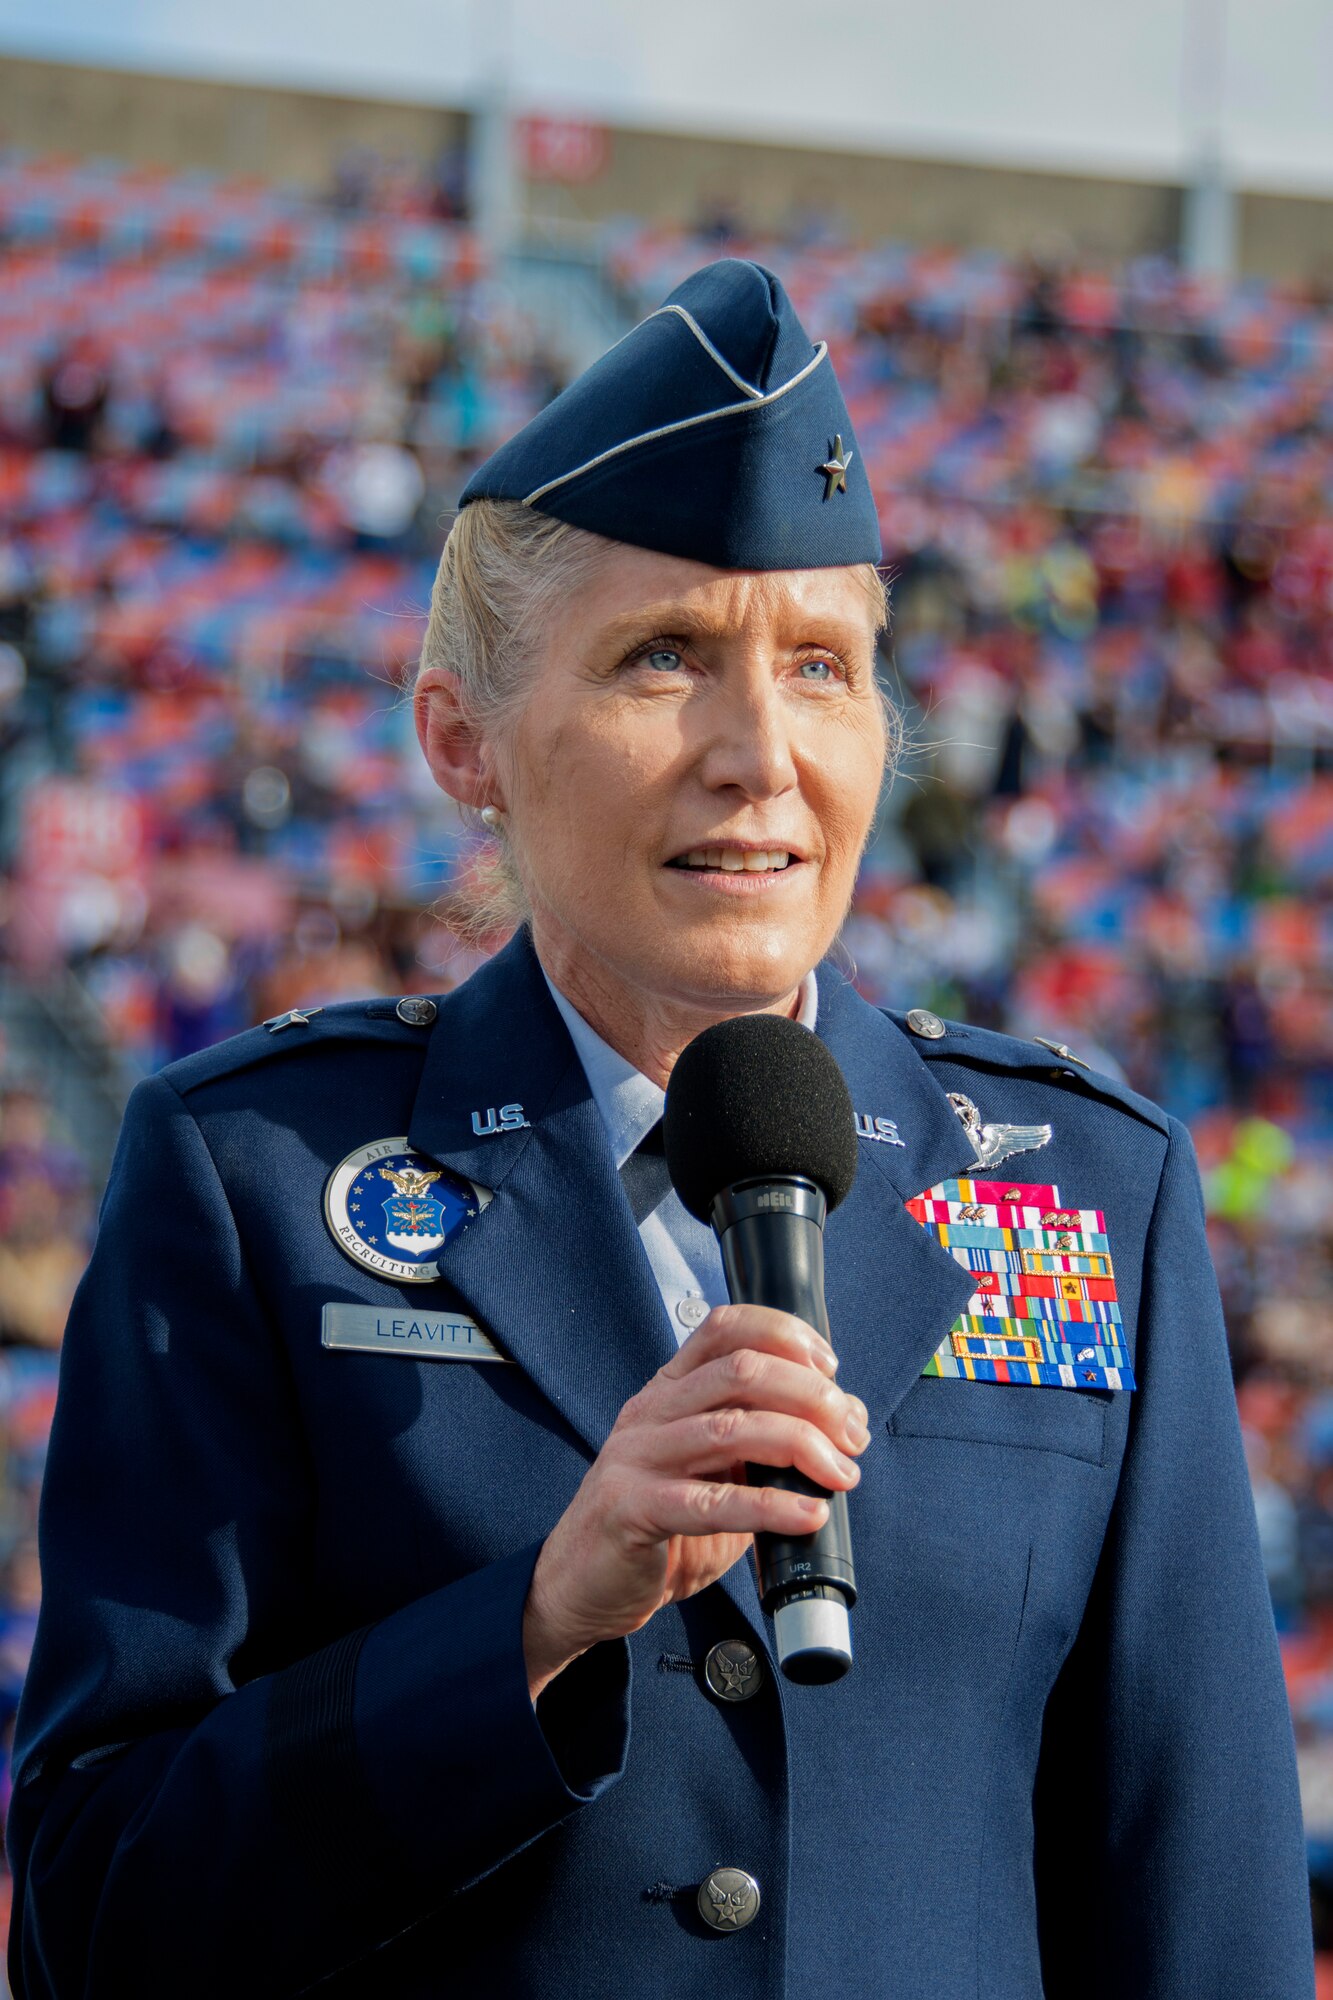 U.S. Air Force Brig. Gen. Jeannie Leavitt, commander of Air Force Recruiting Service, speaks to the crowd during while receiving the 2018 Omar Bradley “Spirit of Independence” Award during halftime of the 2018 Walk On’s Independence Bowl in Shreveport, Louisiana, December 27, 2018. The award is given to American citizens of organizations that symbolize the spirit of freedom and independence which the United States was founded. (U.S. Air Force photo by Airman 1st Class Maxwell Daigle).